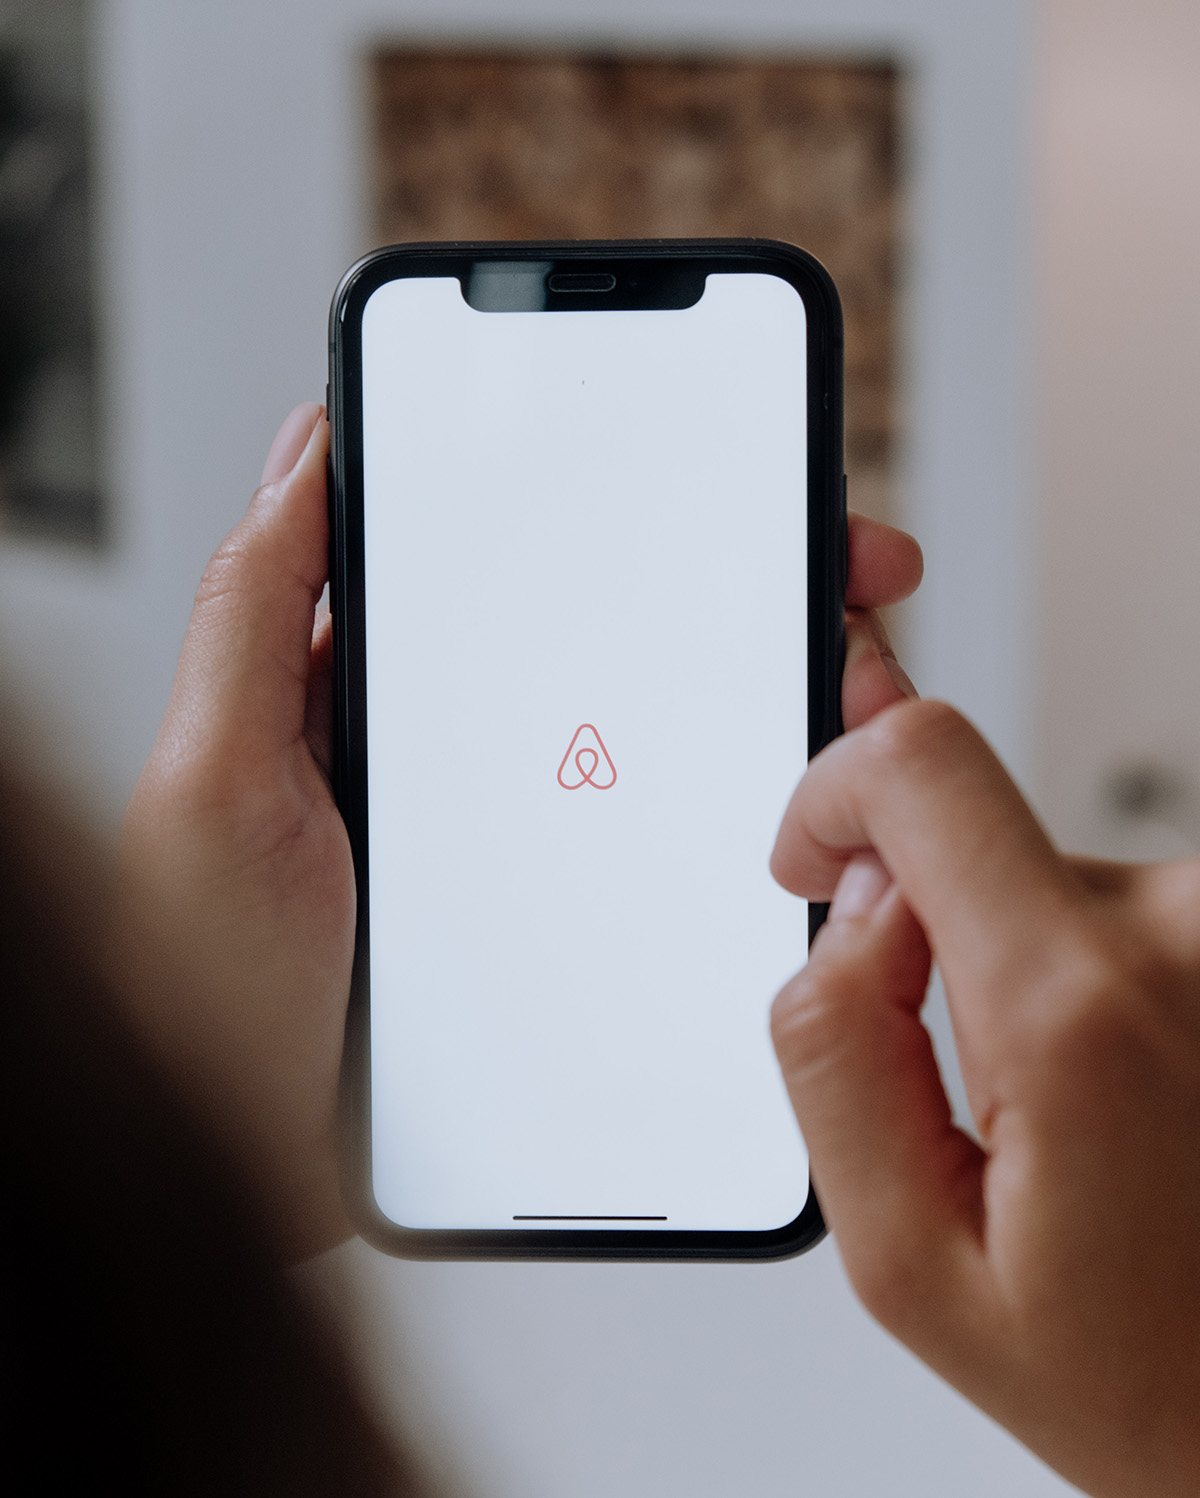 A person loads the Airbnb app on their mobile phone.